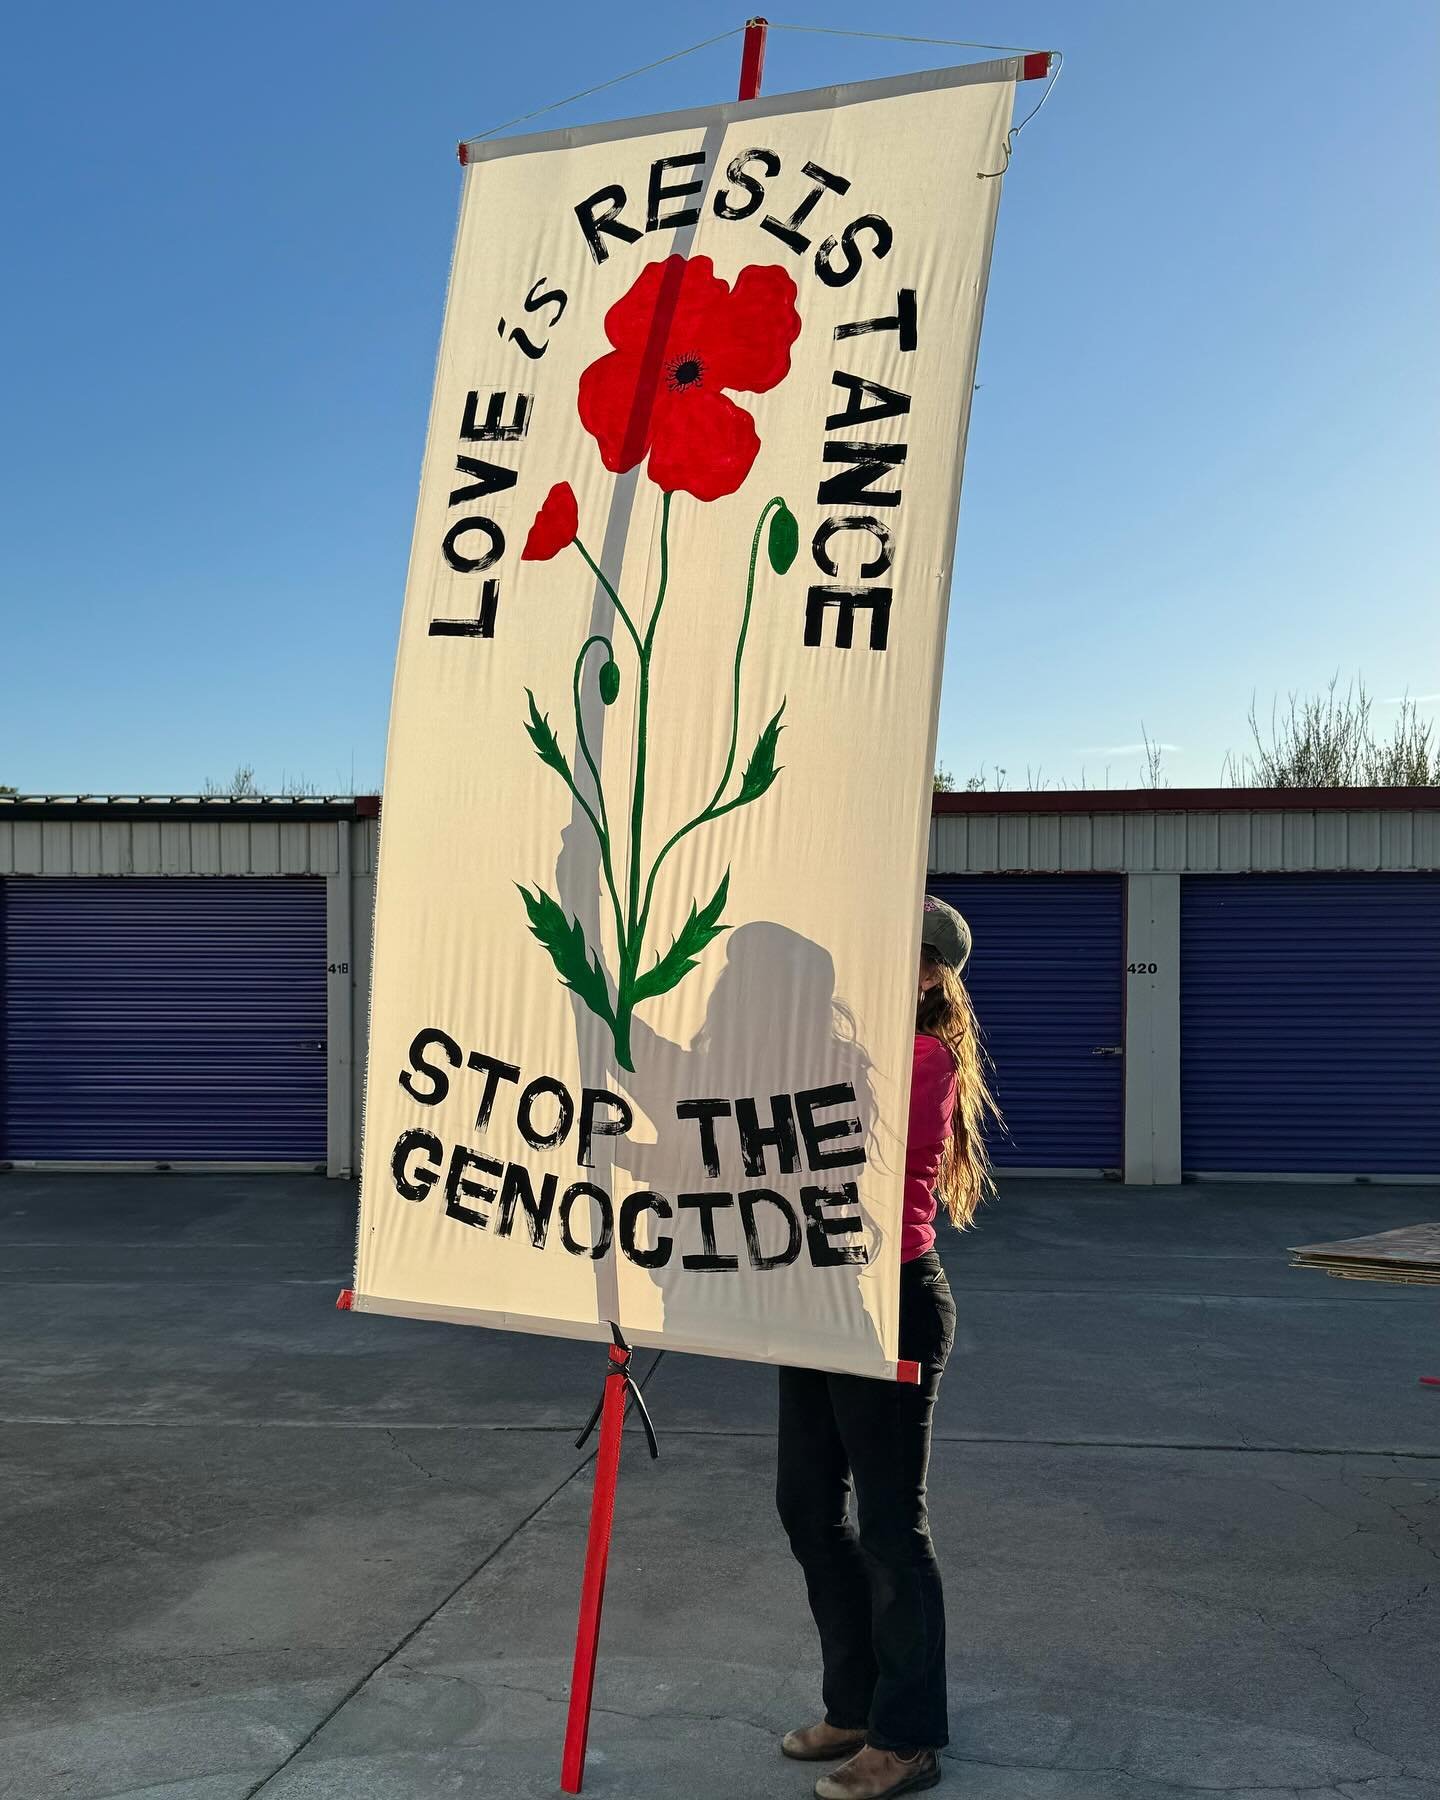 love is resistance // resistance is love 🌹 yesterday&rsquo;s banner painting workshop with @davidsolnit &amp; Julie &amp; @gmamah , learning about design, fabric, paint &amp; message to support movement work 🕊️ painting words and a giant poppy with